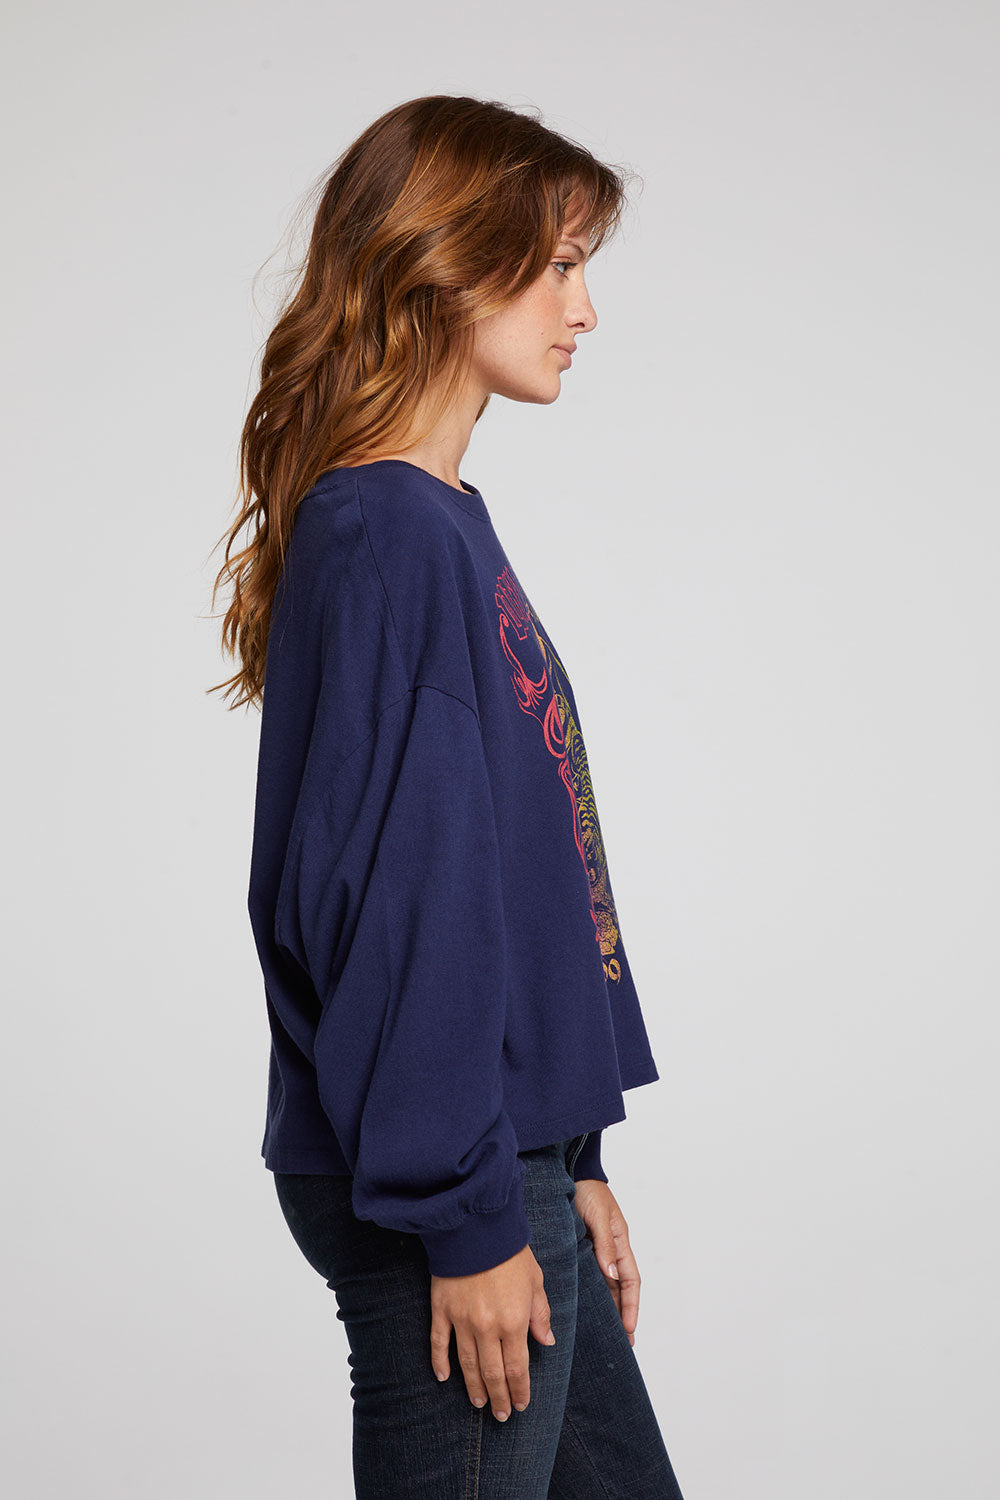 Wild Thing Long Sleeve Tee WOMENS chaserbrand